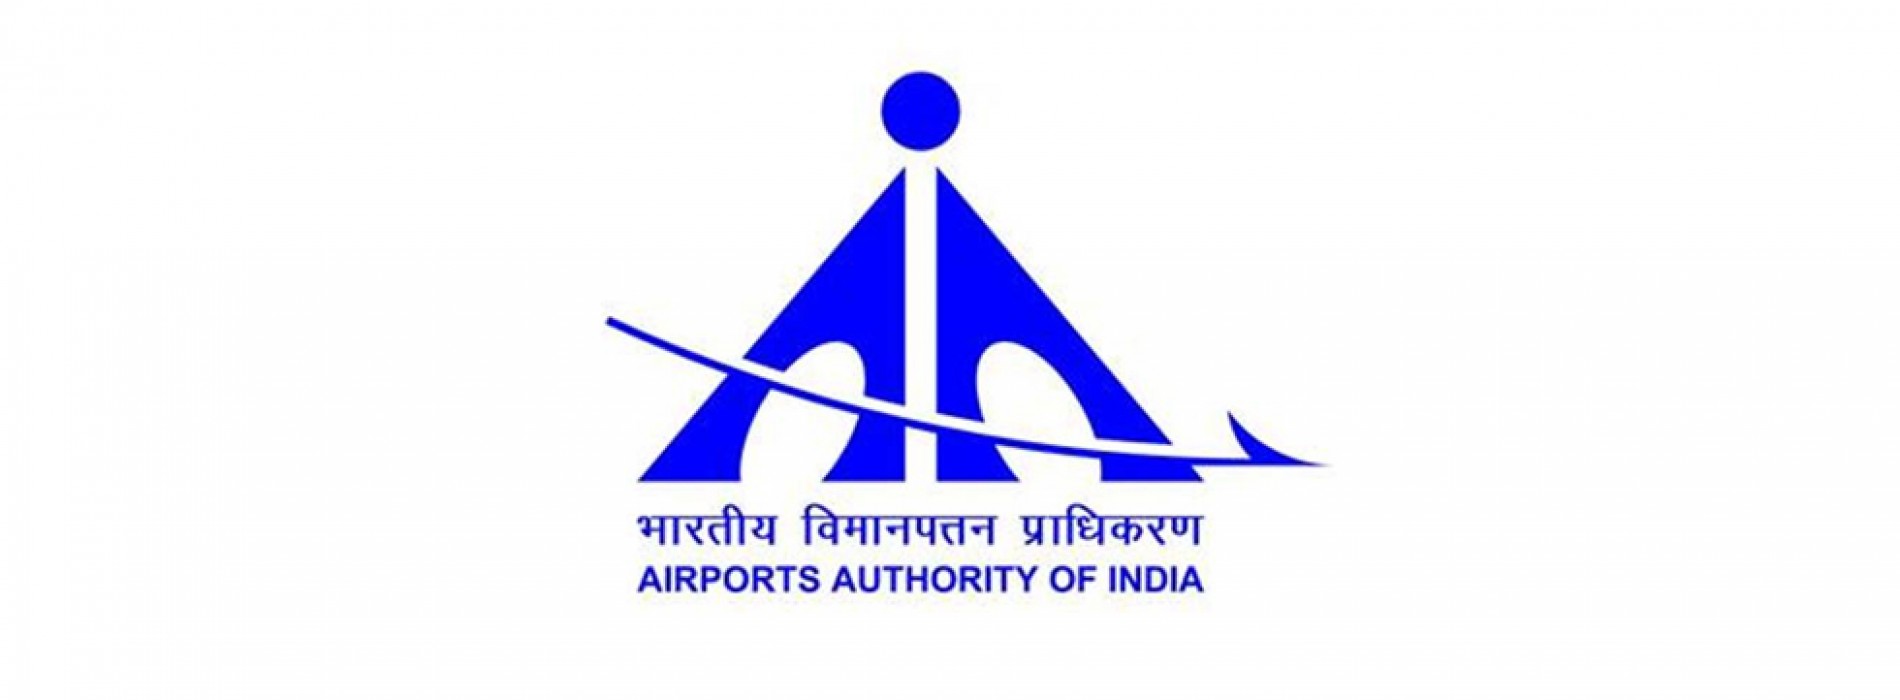 AAI plans national strategy for airports development